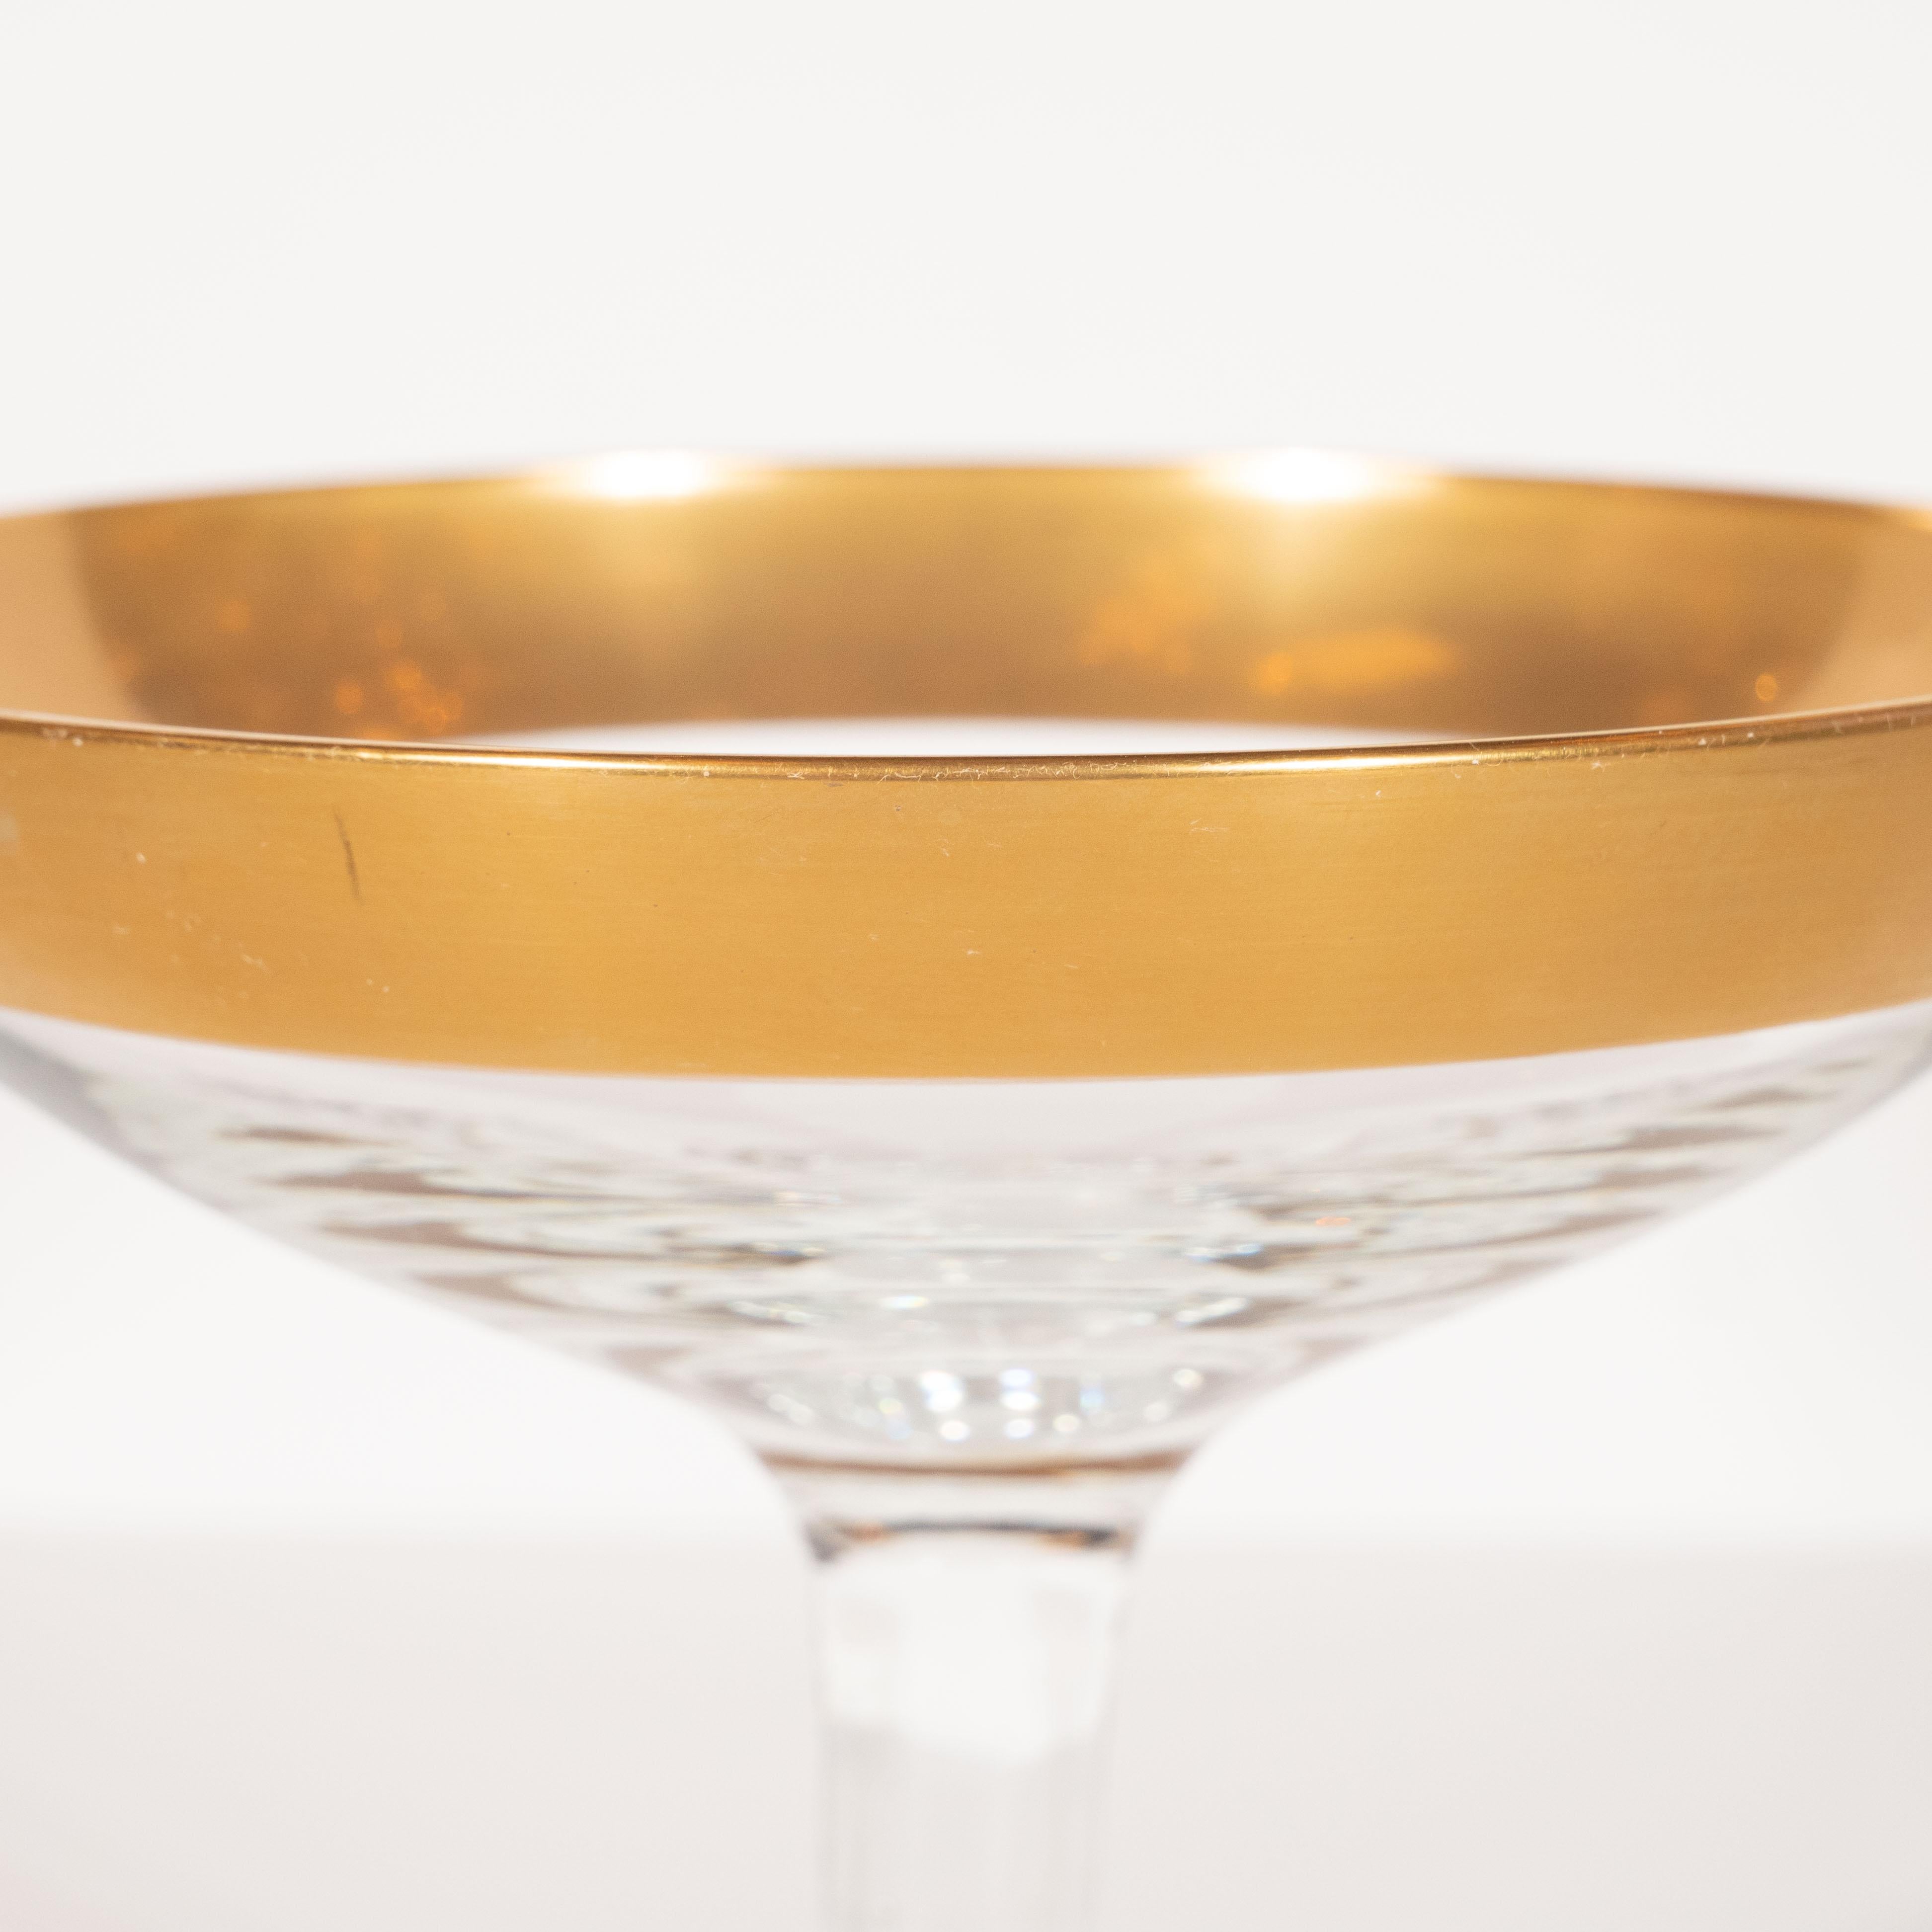 This elegant set of six champagne coupes were realized by the esteemed Mid-Century Modern designer, Dorothy Thorpe, circa 1945. They feature 24-karat gold rims- an exceptionally rare and sought after edition of this iconic glasses set-